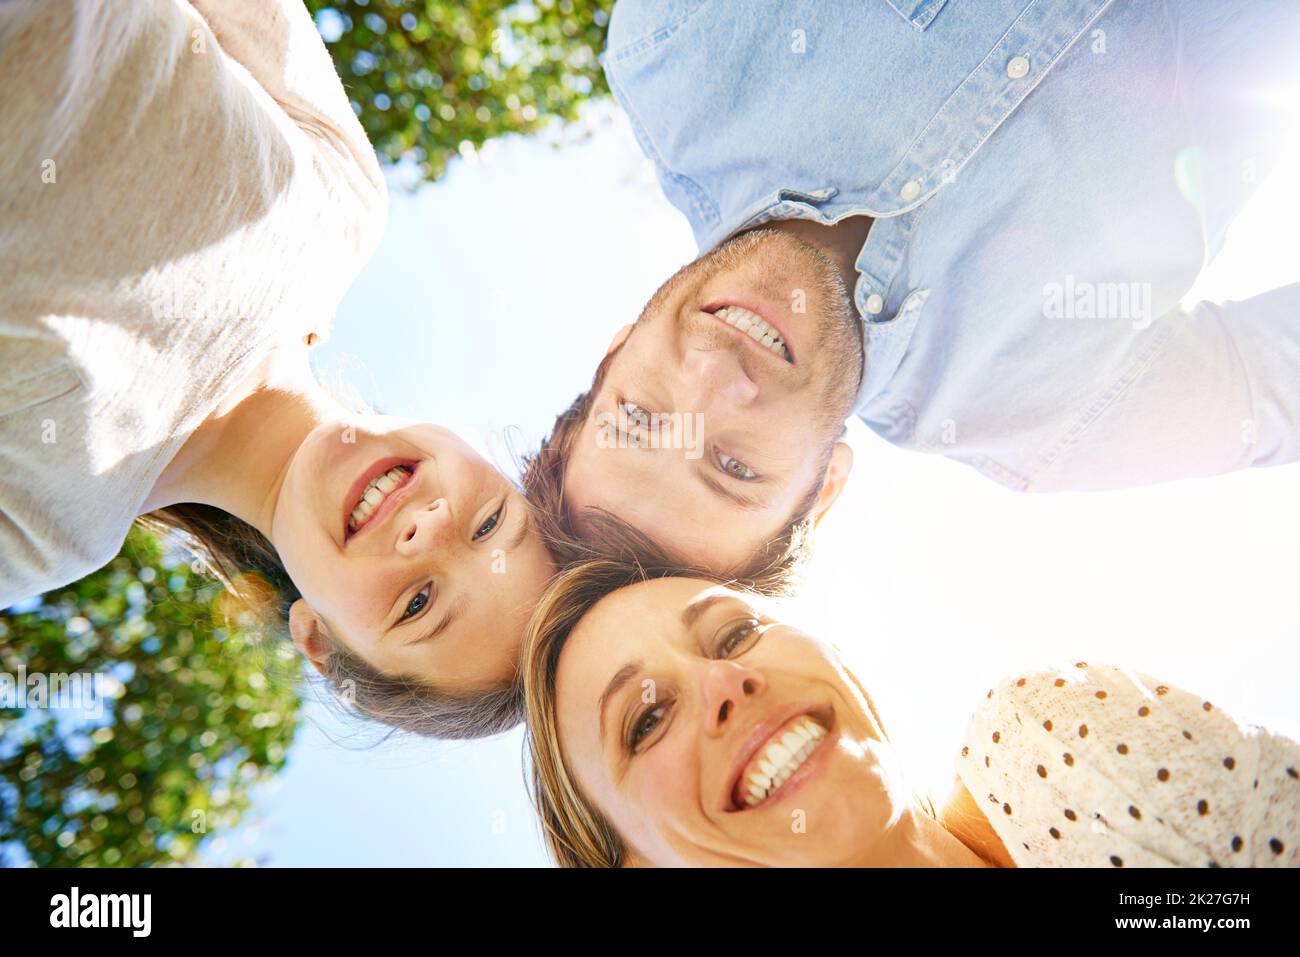 Make more time for what matters most. Portrait of a family of three looking down at the camera. Stock Photo